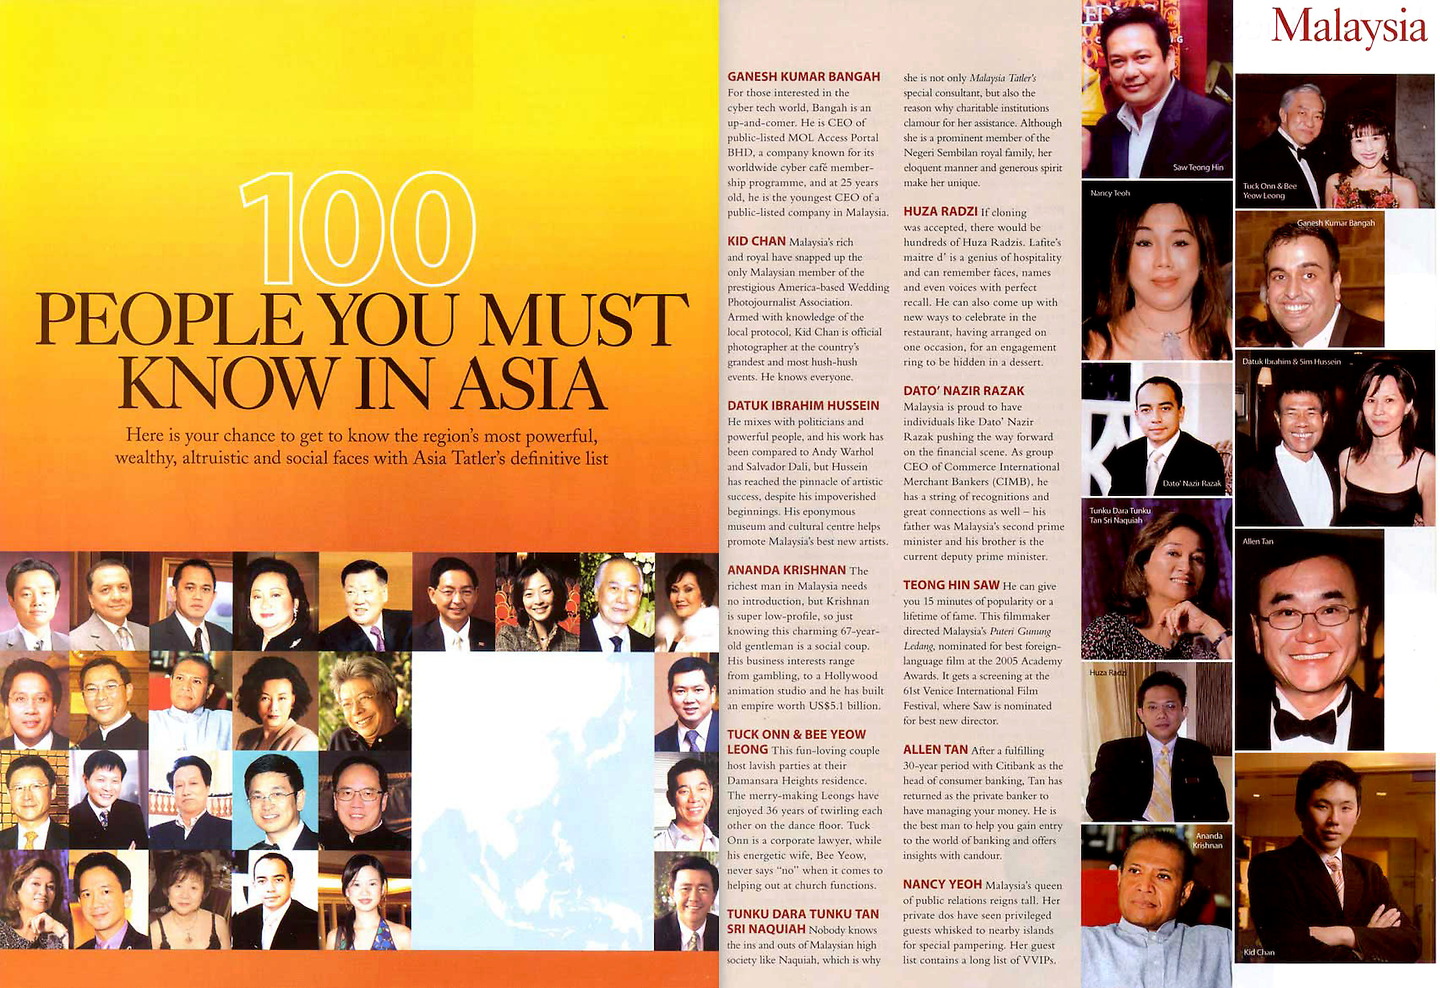 Asian Tatler: 100 People You Must Know in Asia